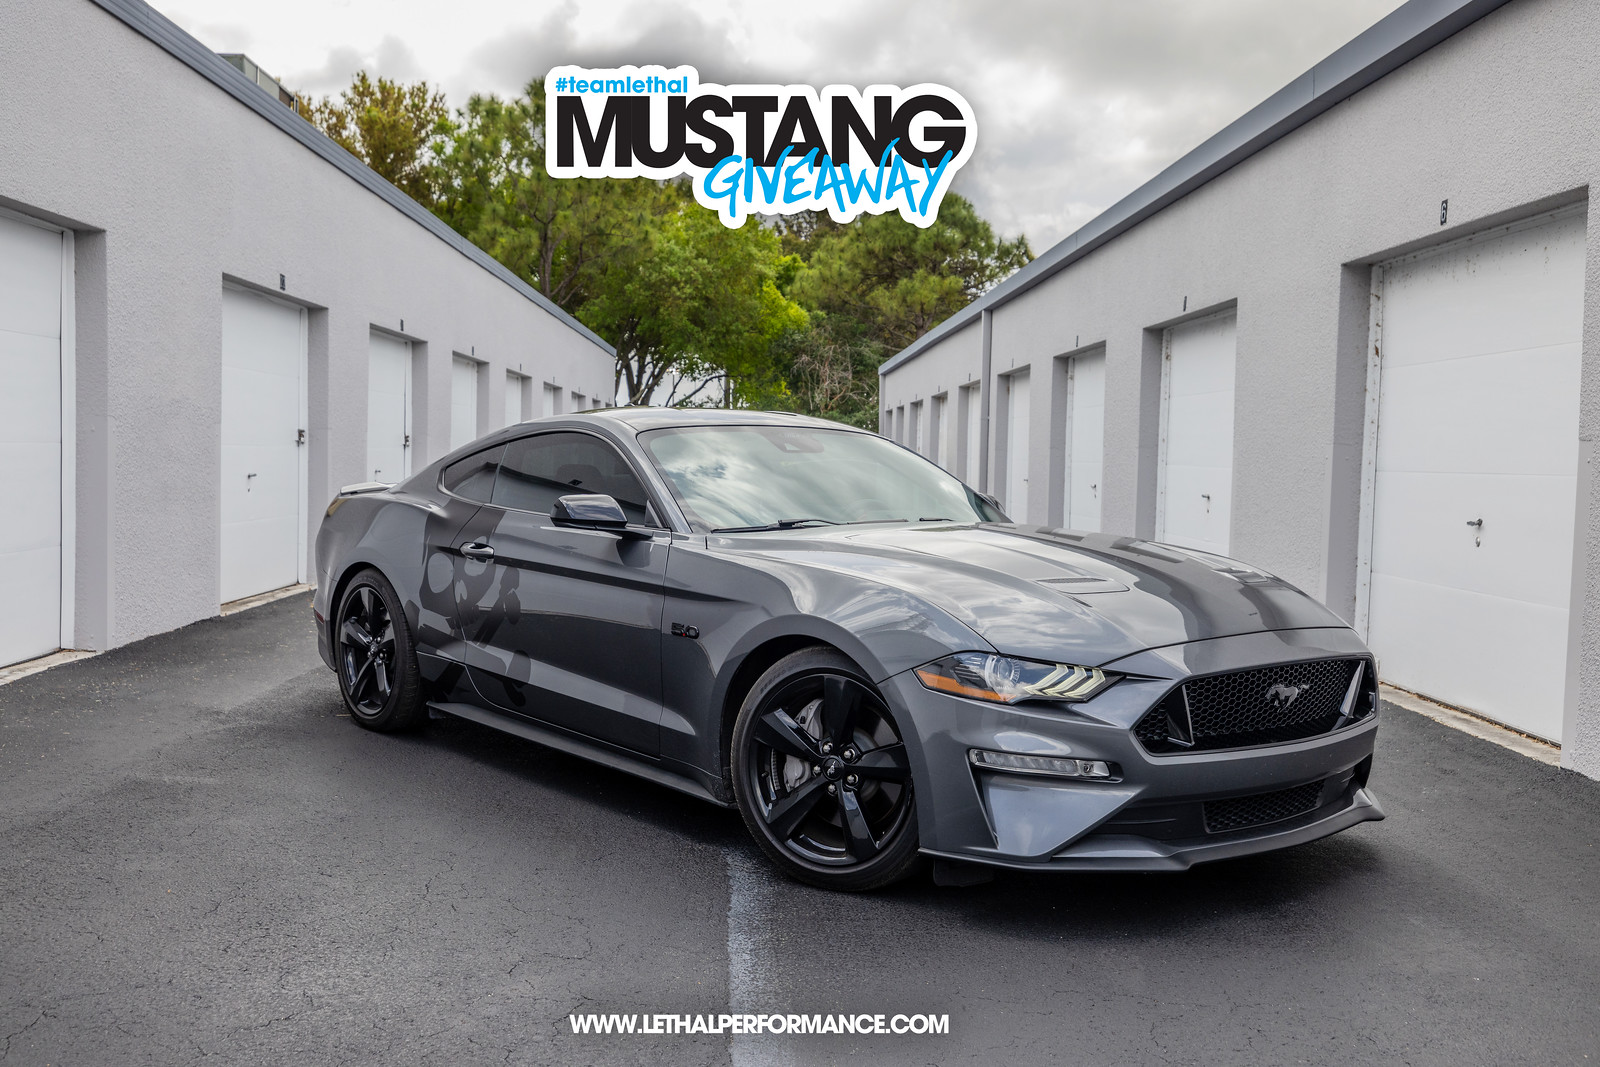 S650 Mustang #TEAMLETHAL MUSTANG GIVEAWAY IS LIVE!!! i-csKFpMJ-X3